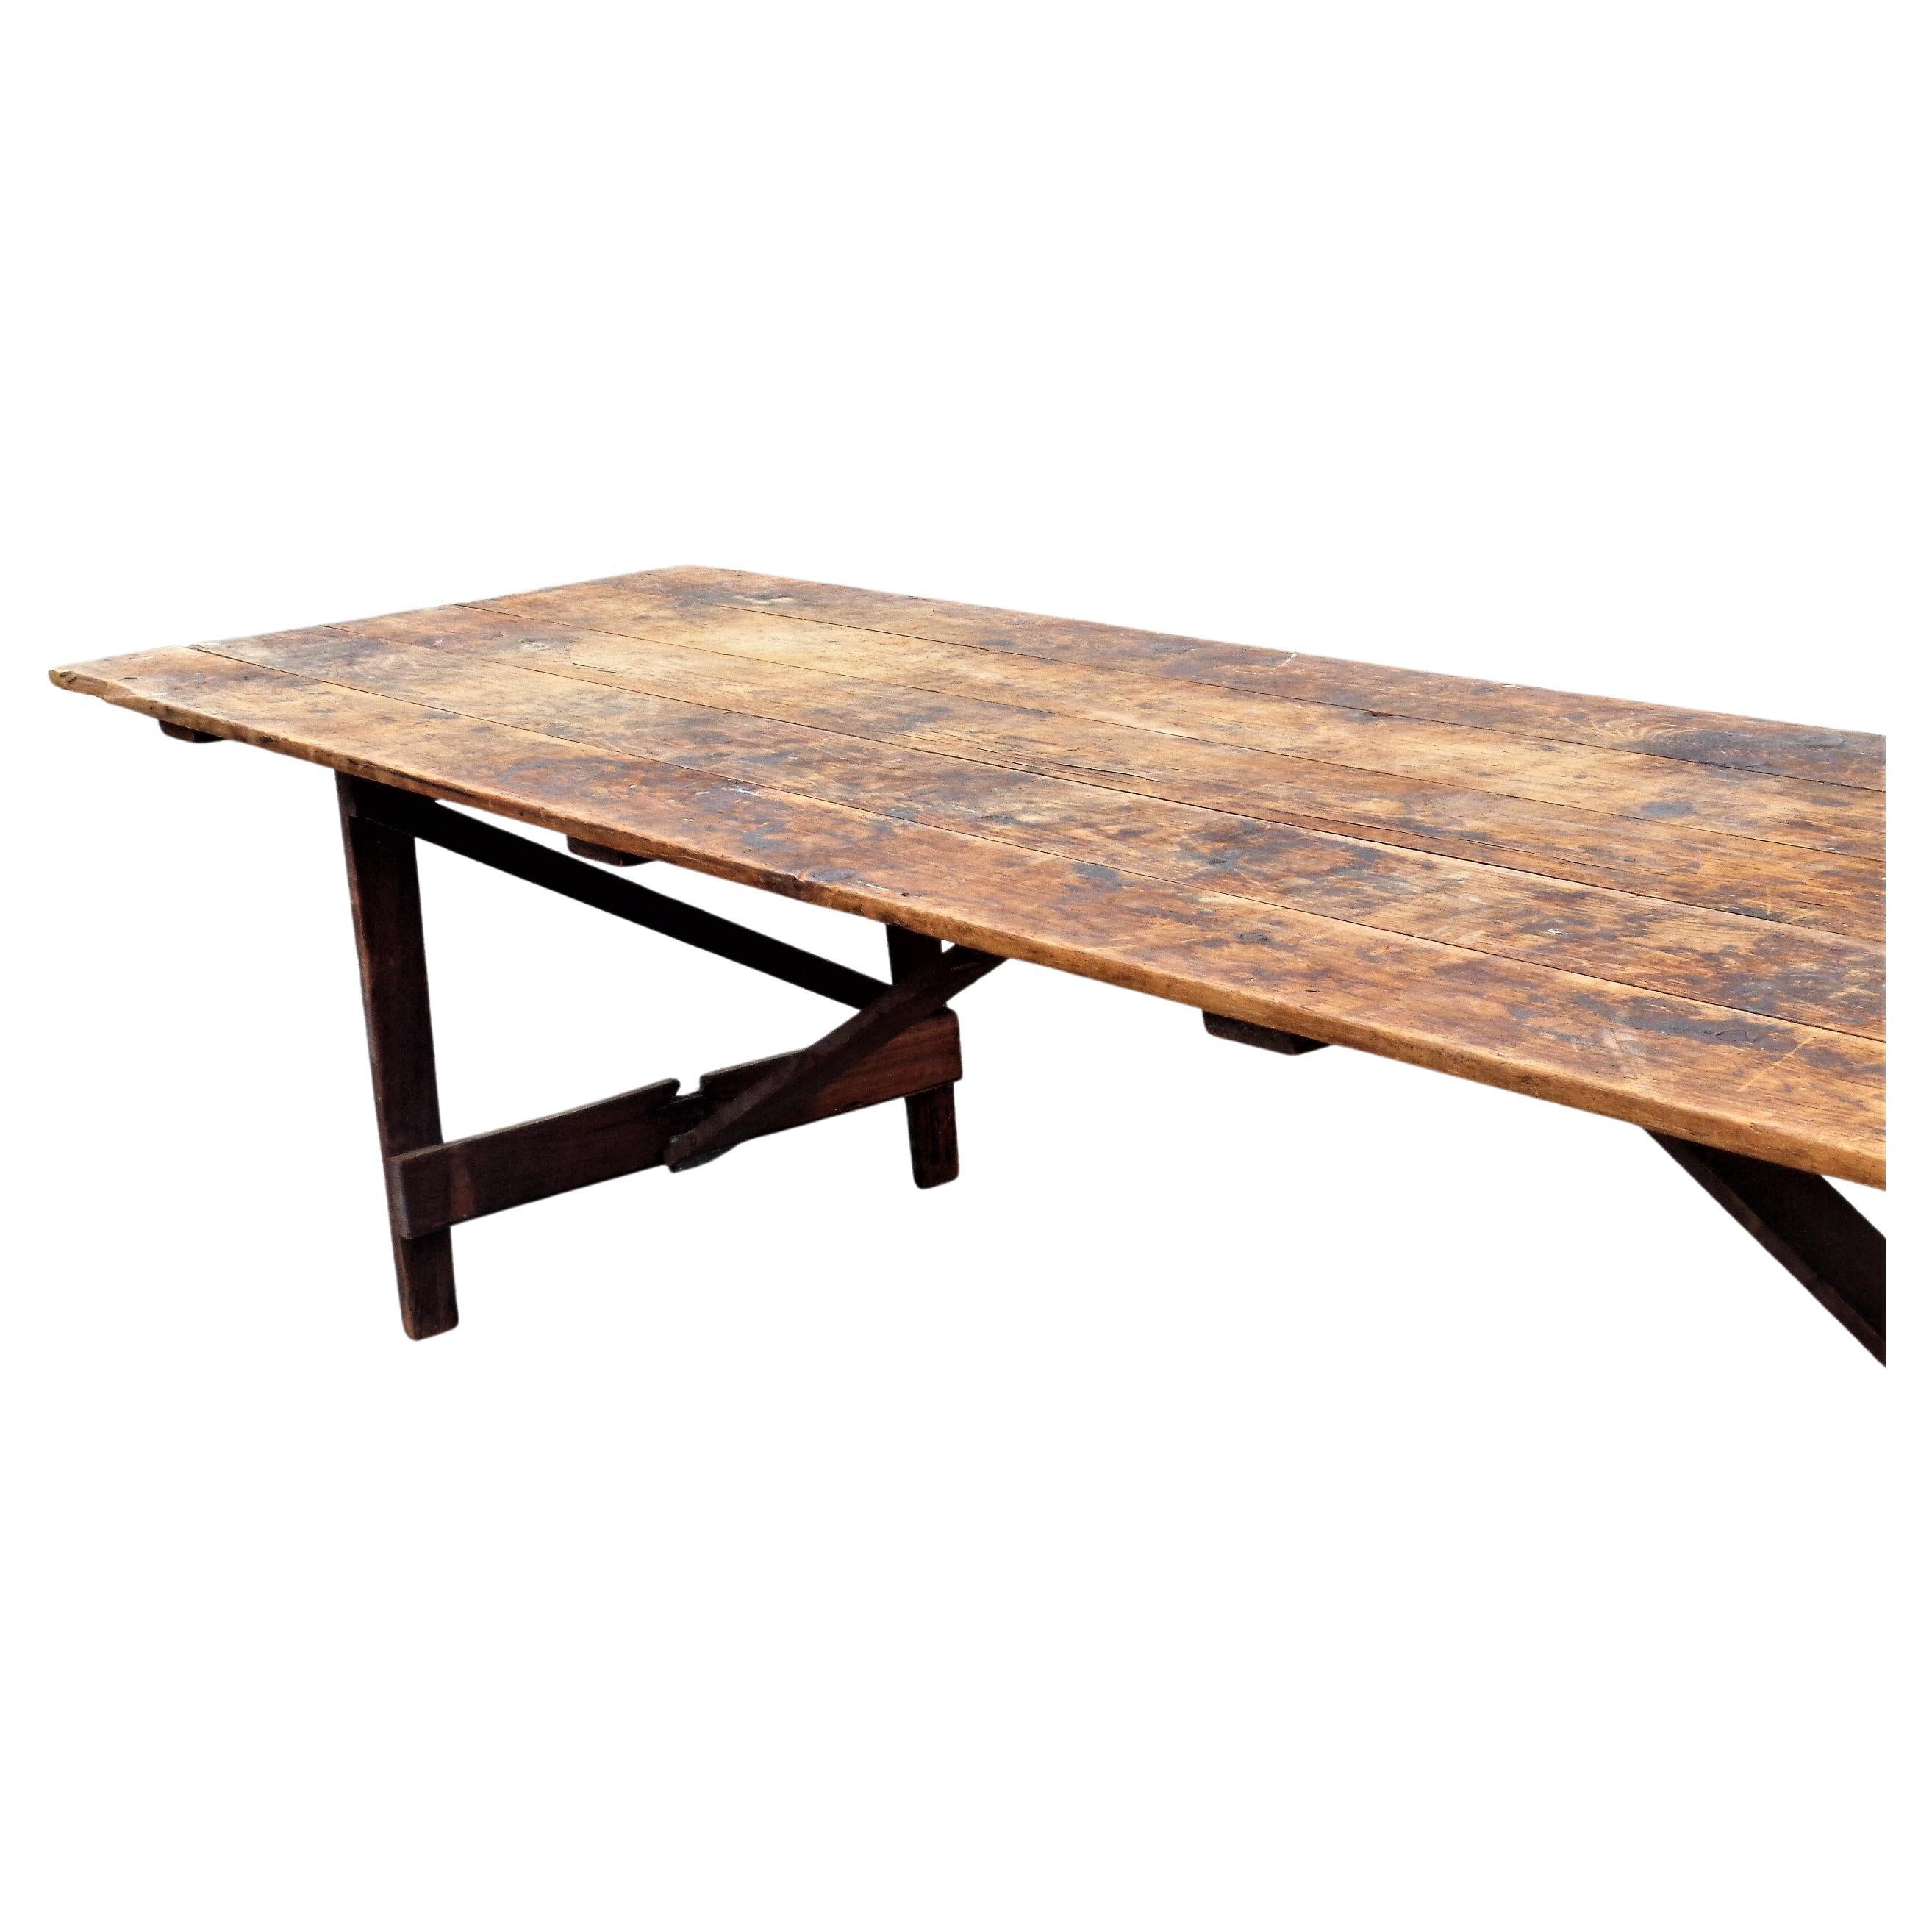 Rare antique American grange farm harvest table with fold up legs in the most beautifully aged original undisturbed surface color patina. Structurally rock solid strong with no wobble. Measures 132 inches long x 36 inches wide x 28 inches high w/